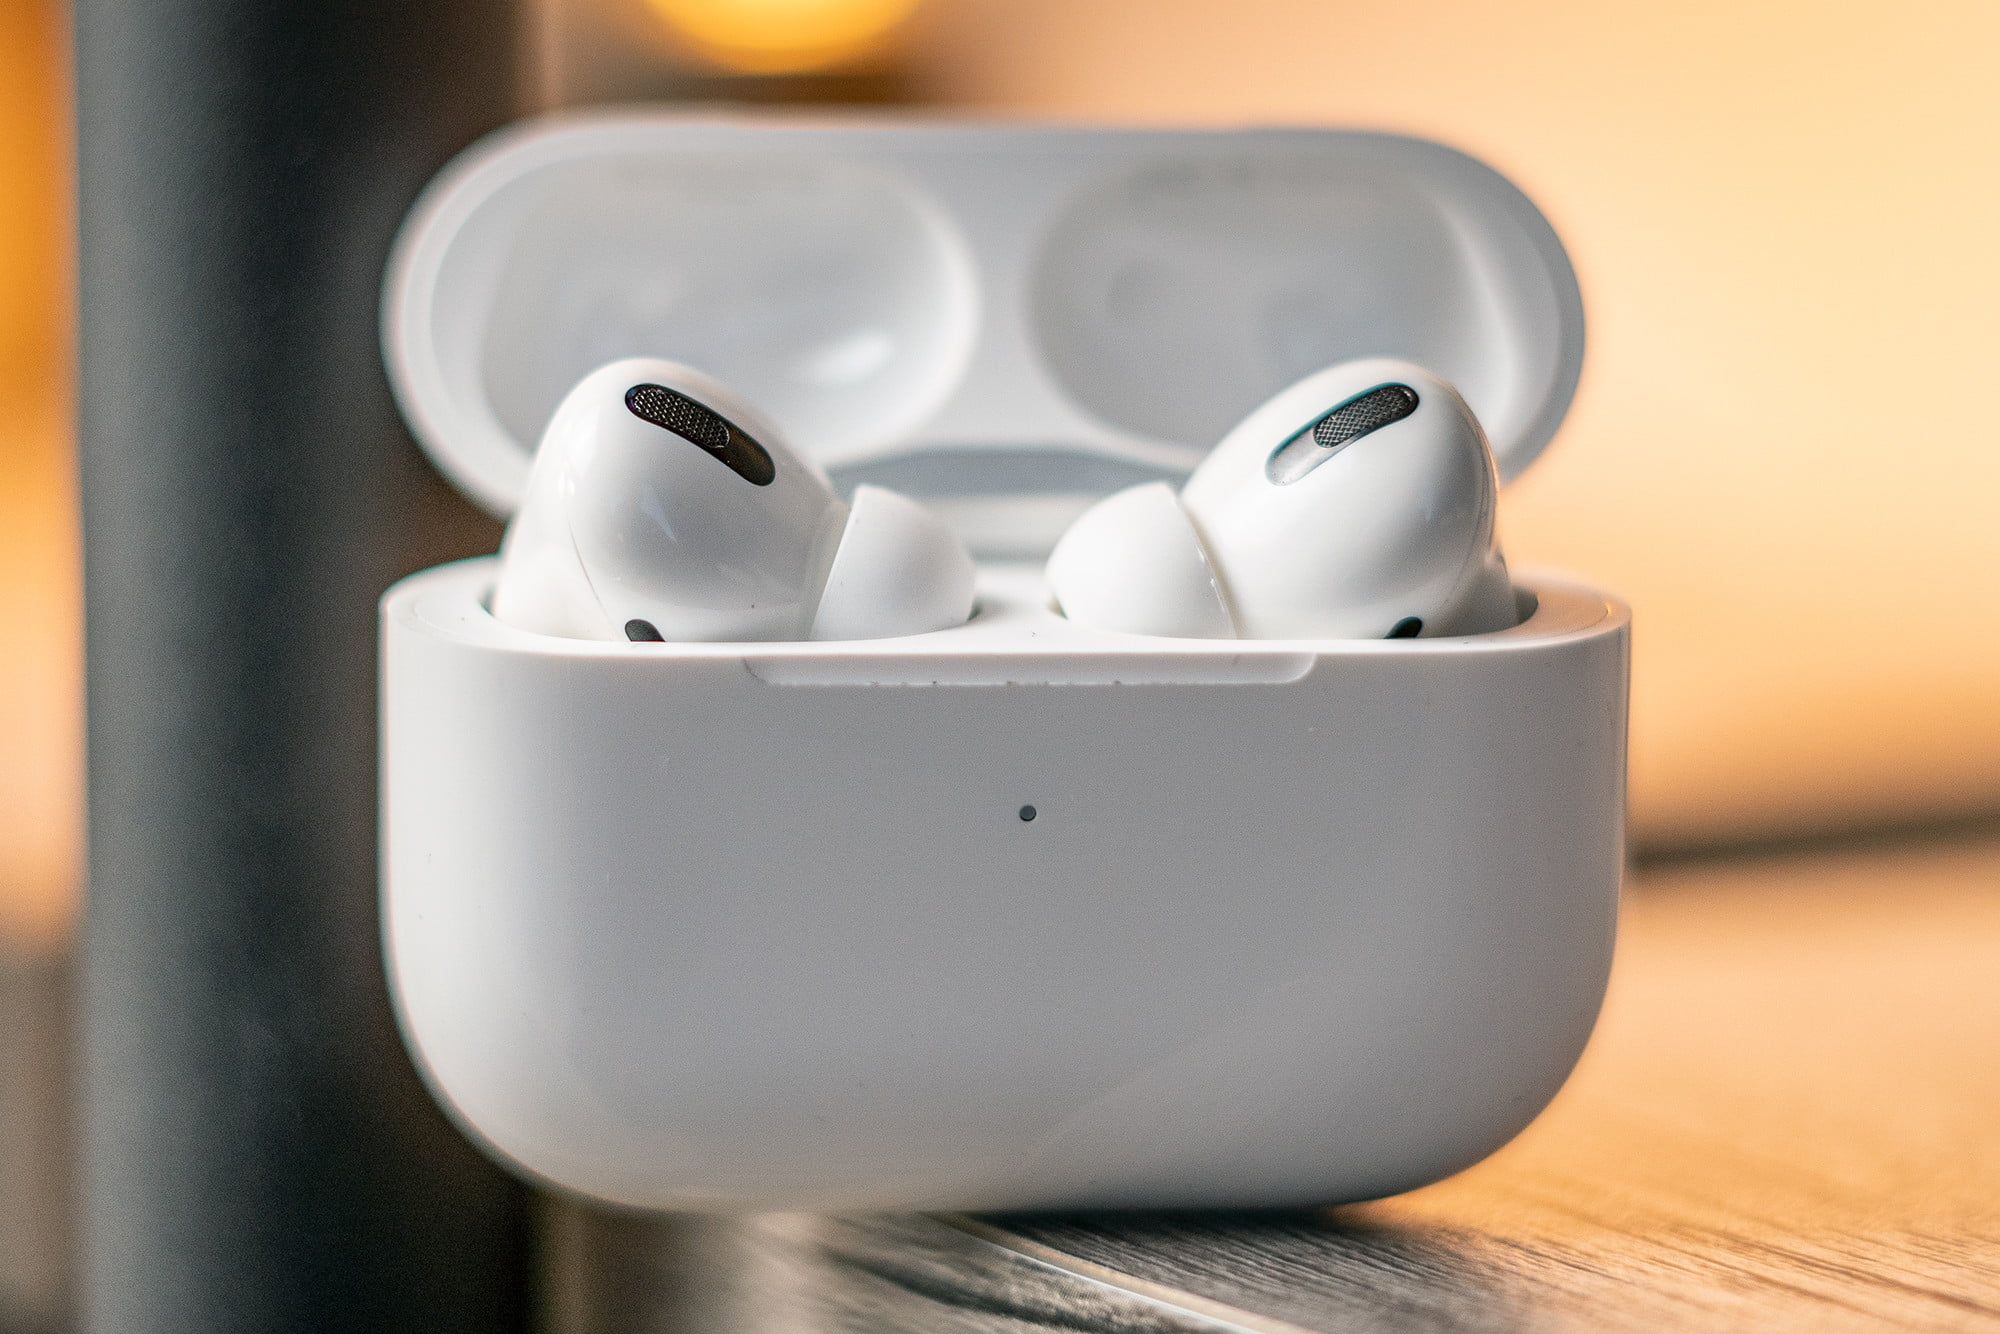 Airpods air pro. Наушники AIRPODS Pro 2. Apple AIRPODS Pro 3. Наушники Эппл аирподс про. Apple AIRPODS 3rd Generation.